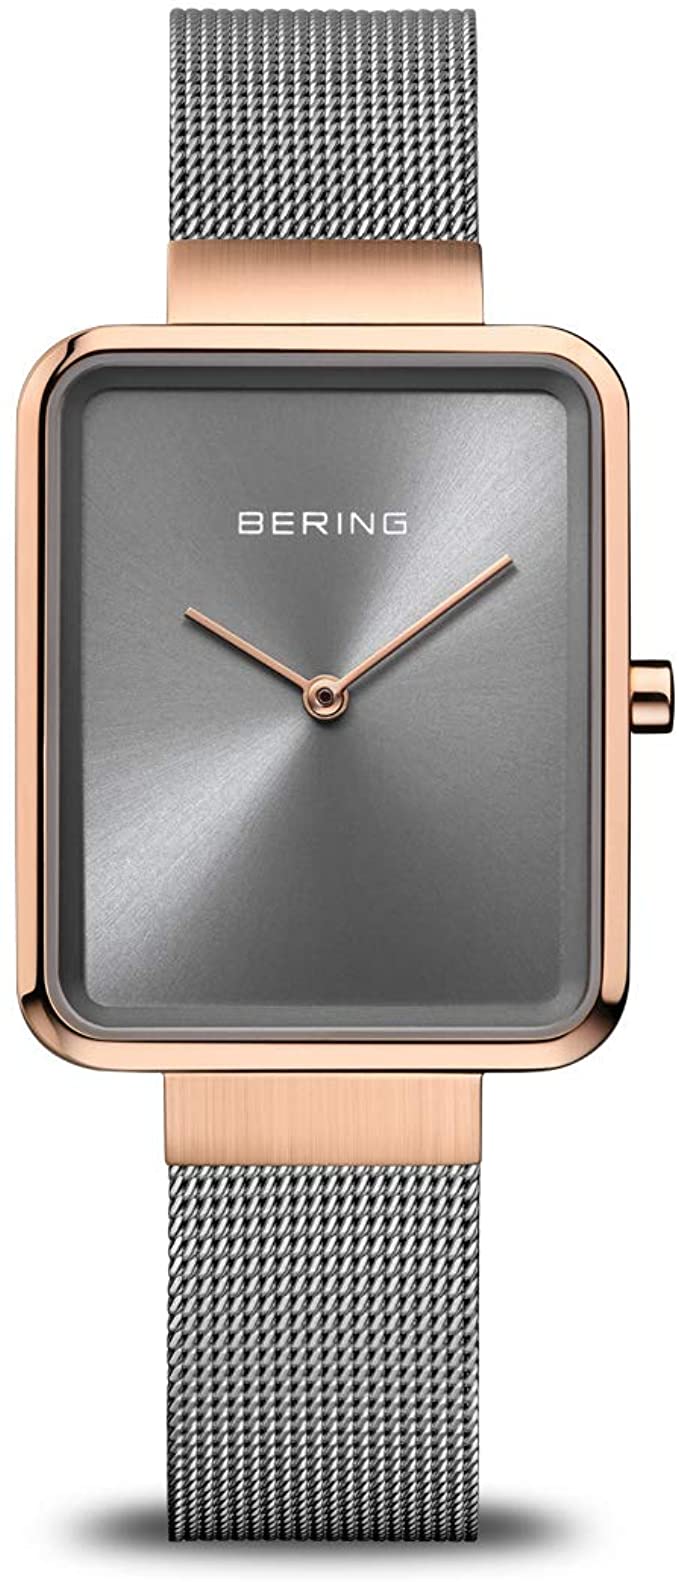 BERING Time | Women's Slim Watch 14528-369 | 28MM Case | Classic Collection | Stainless Steel Strap | Scratch-Resistant Sapphire Crystal | Minimalistic - Designed in Denmark